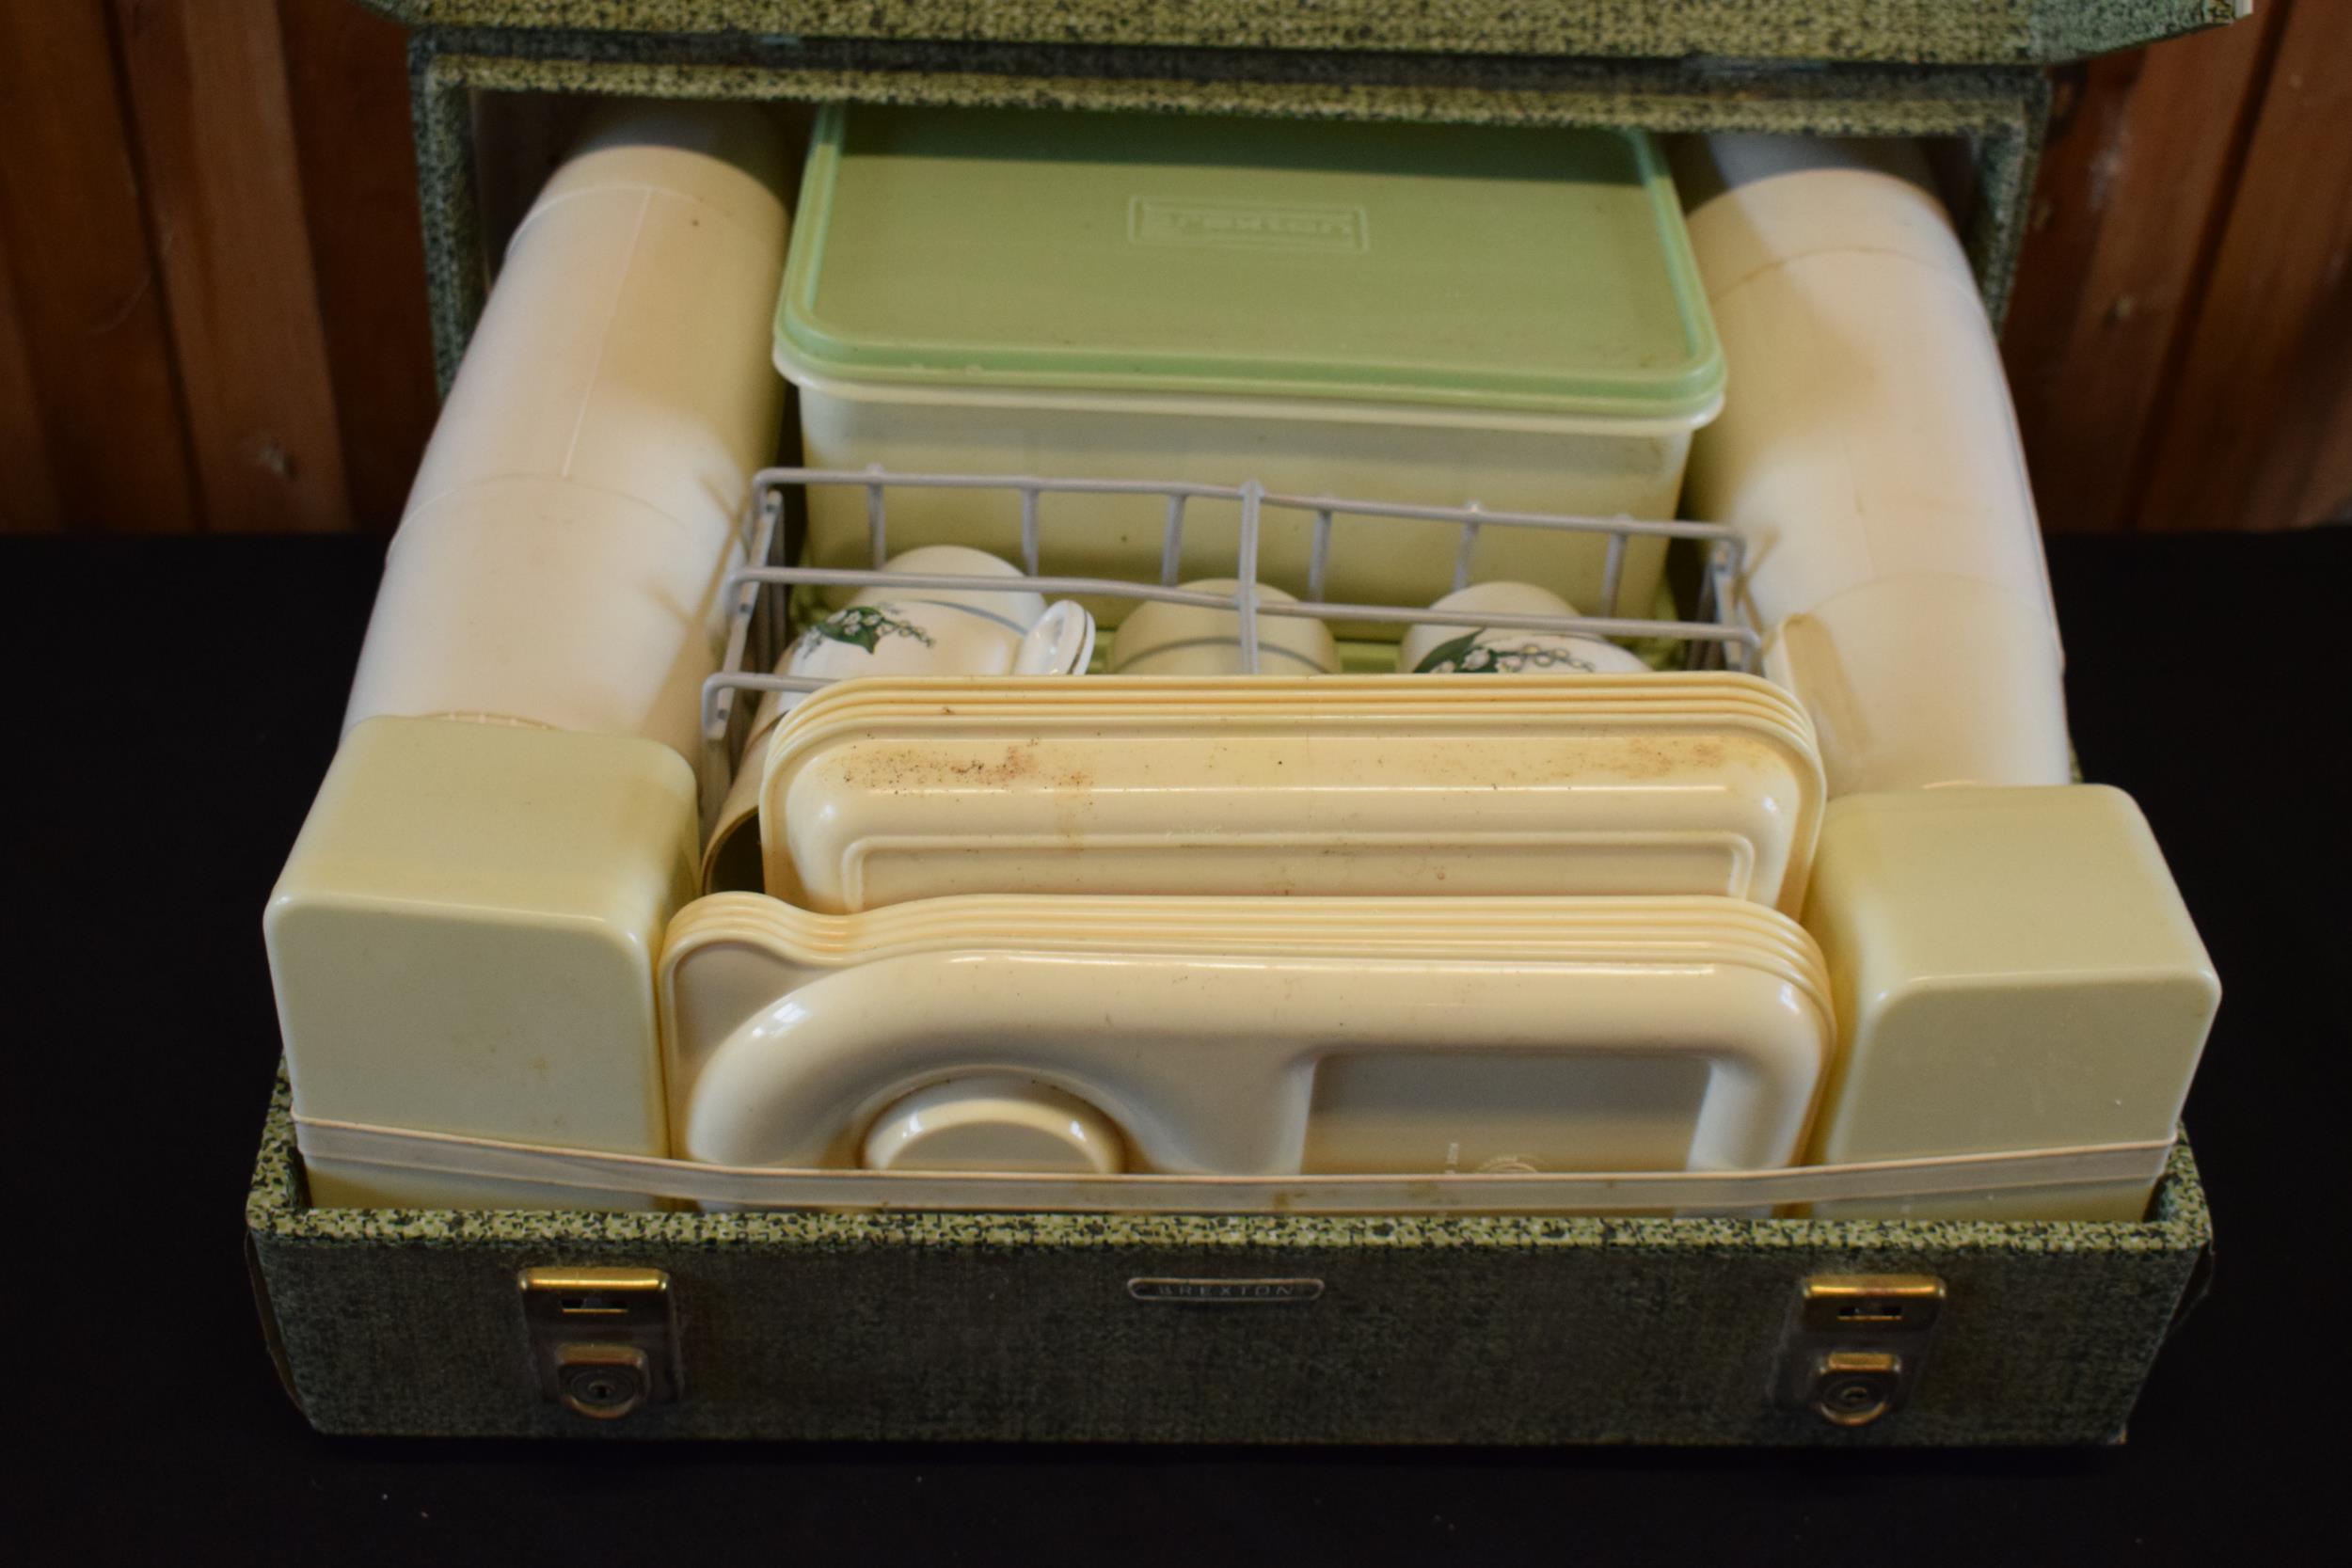 A vintage Brexton picnic case and contents. - Image 4 of 6